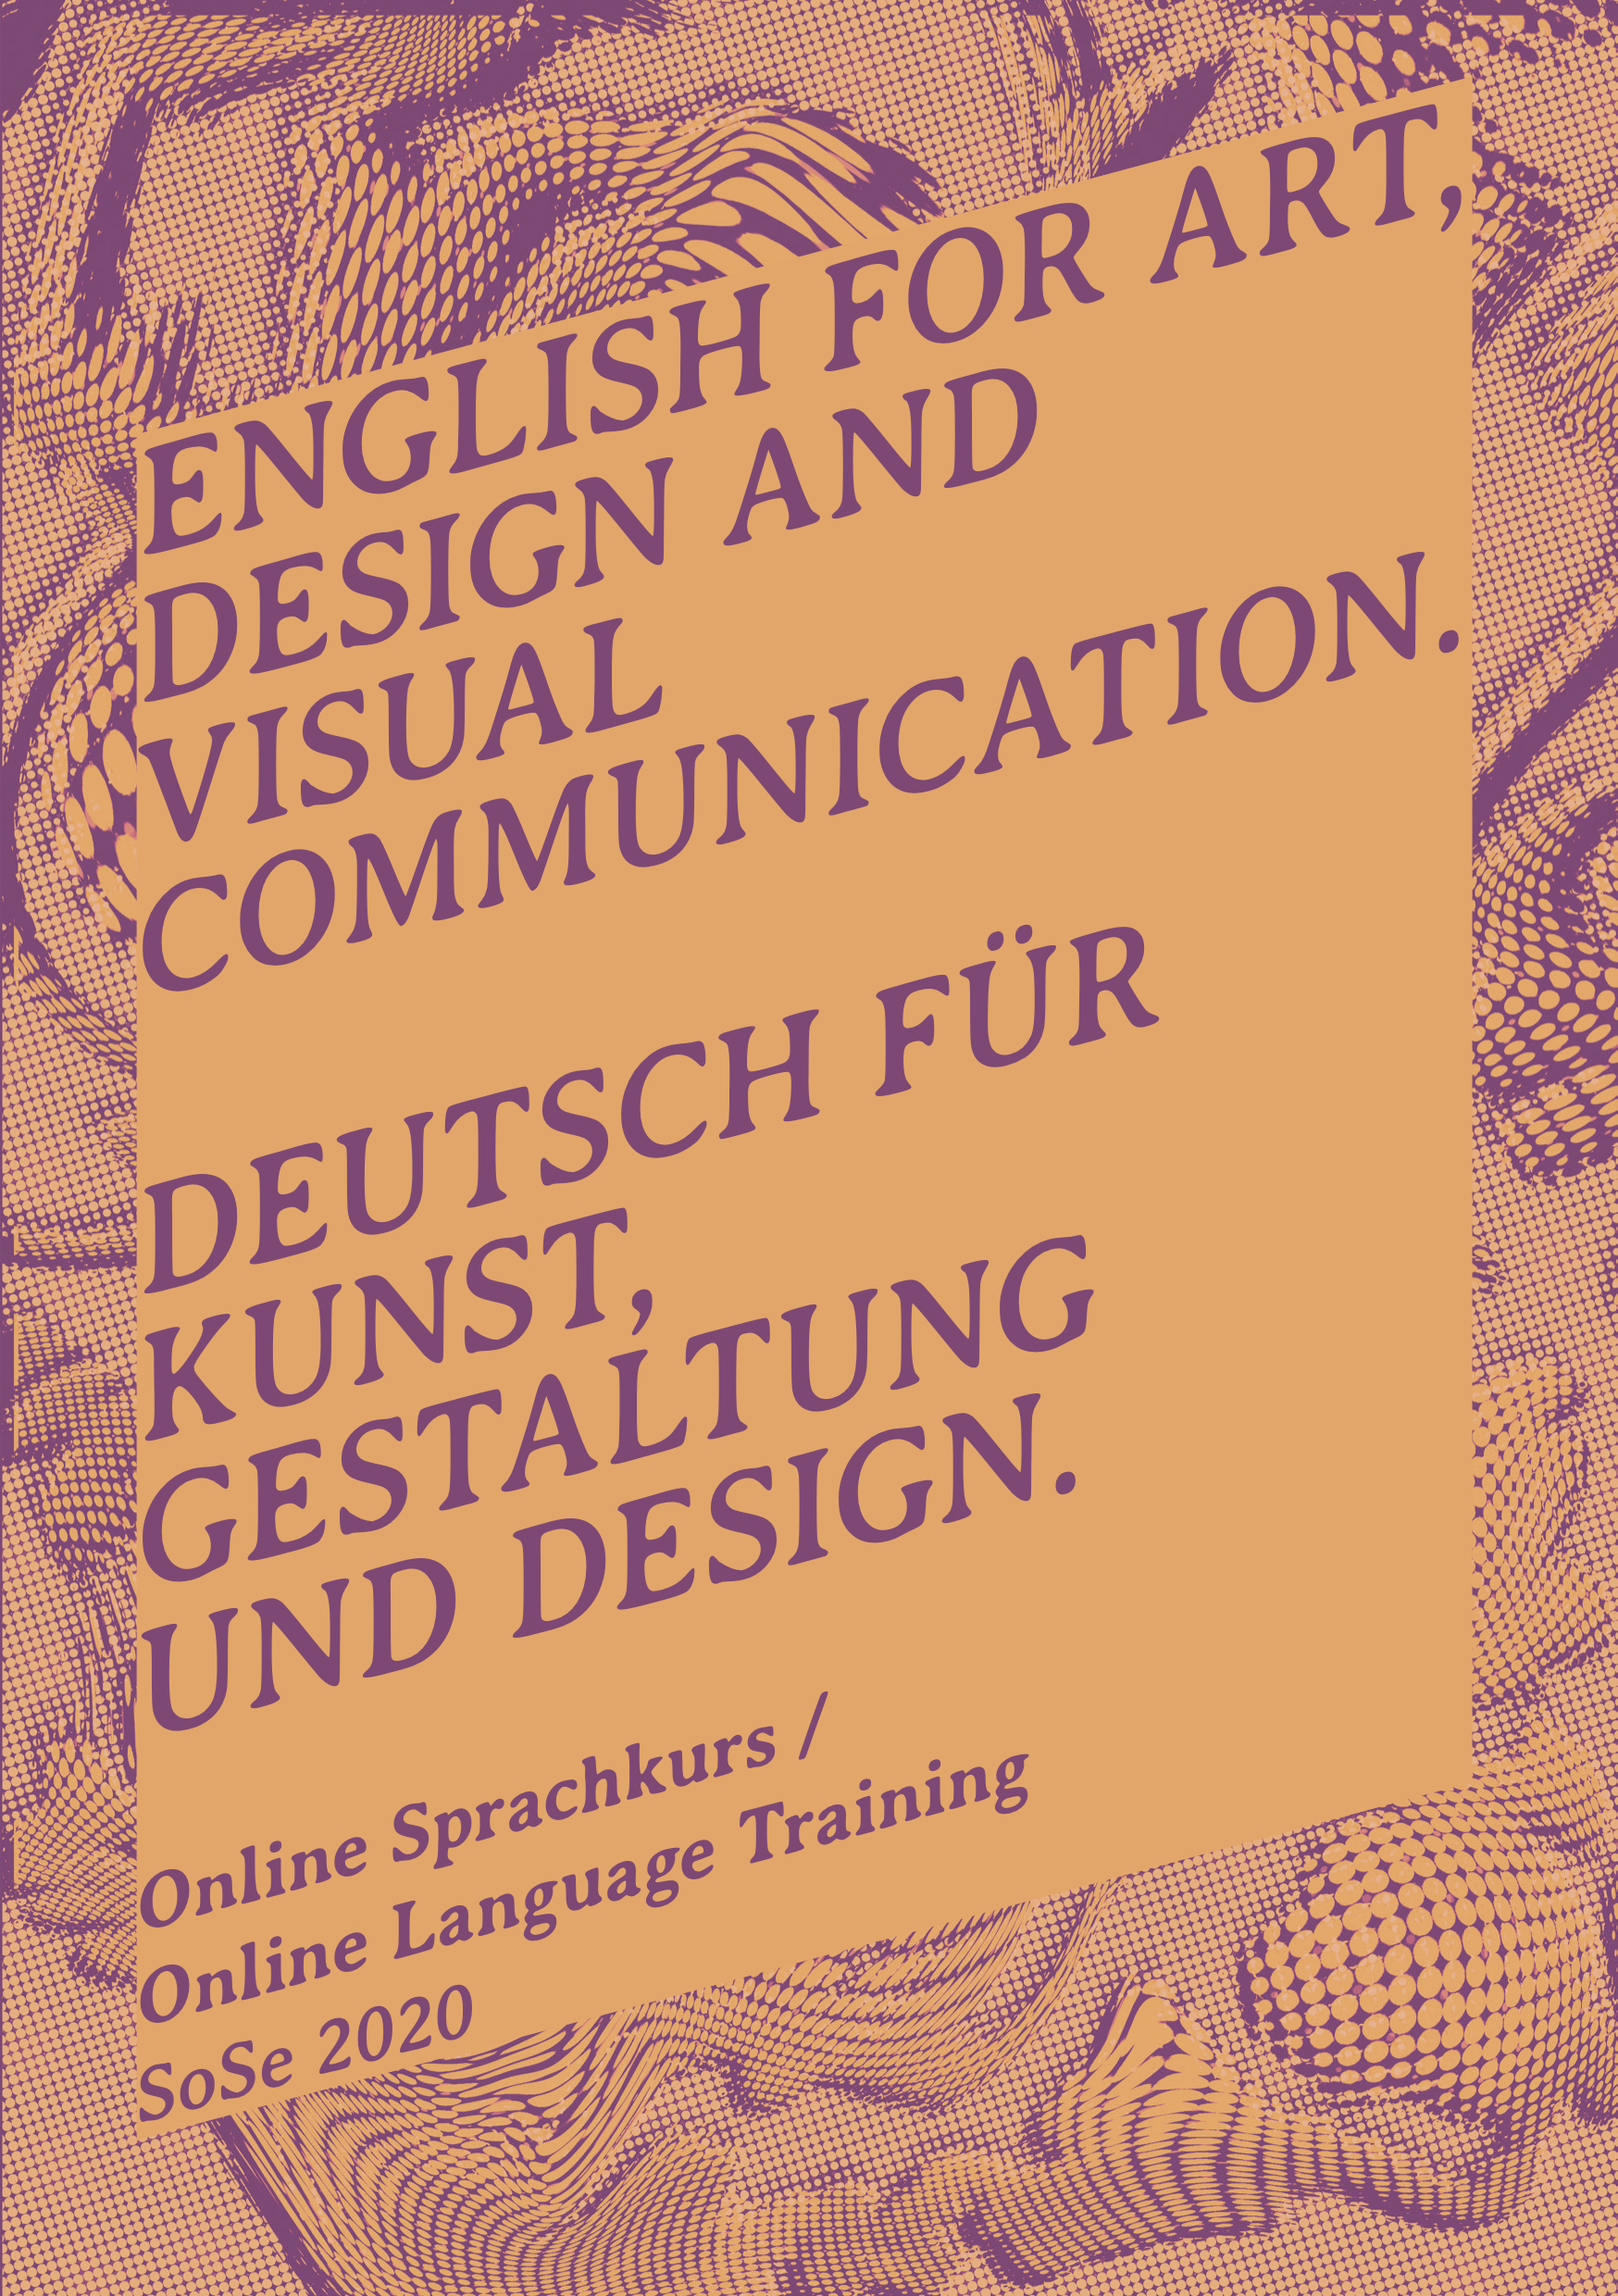 ENGLISH FOR ART, DESIGN AND VISUAL COMMUNICATION